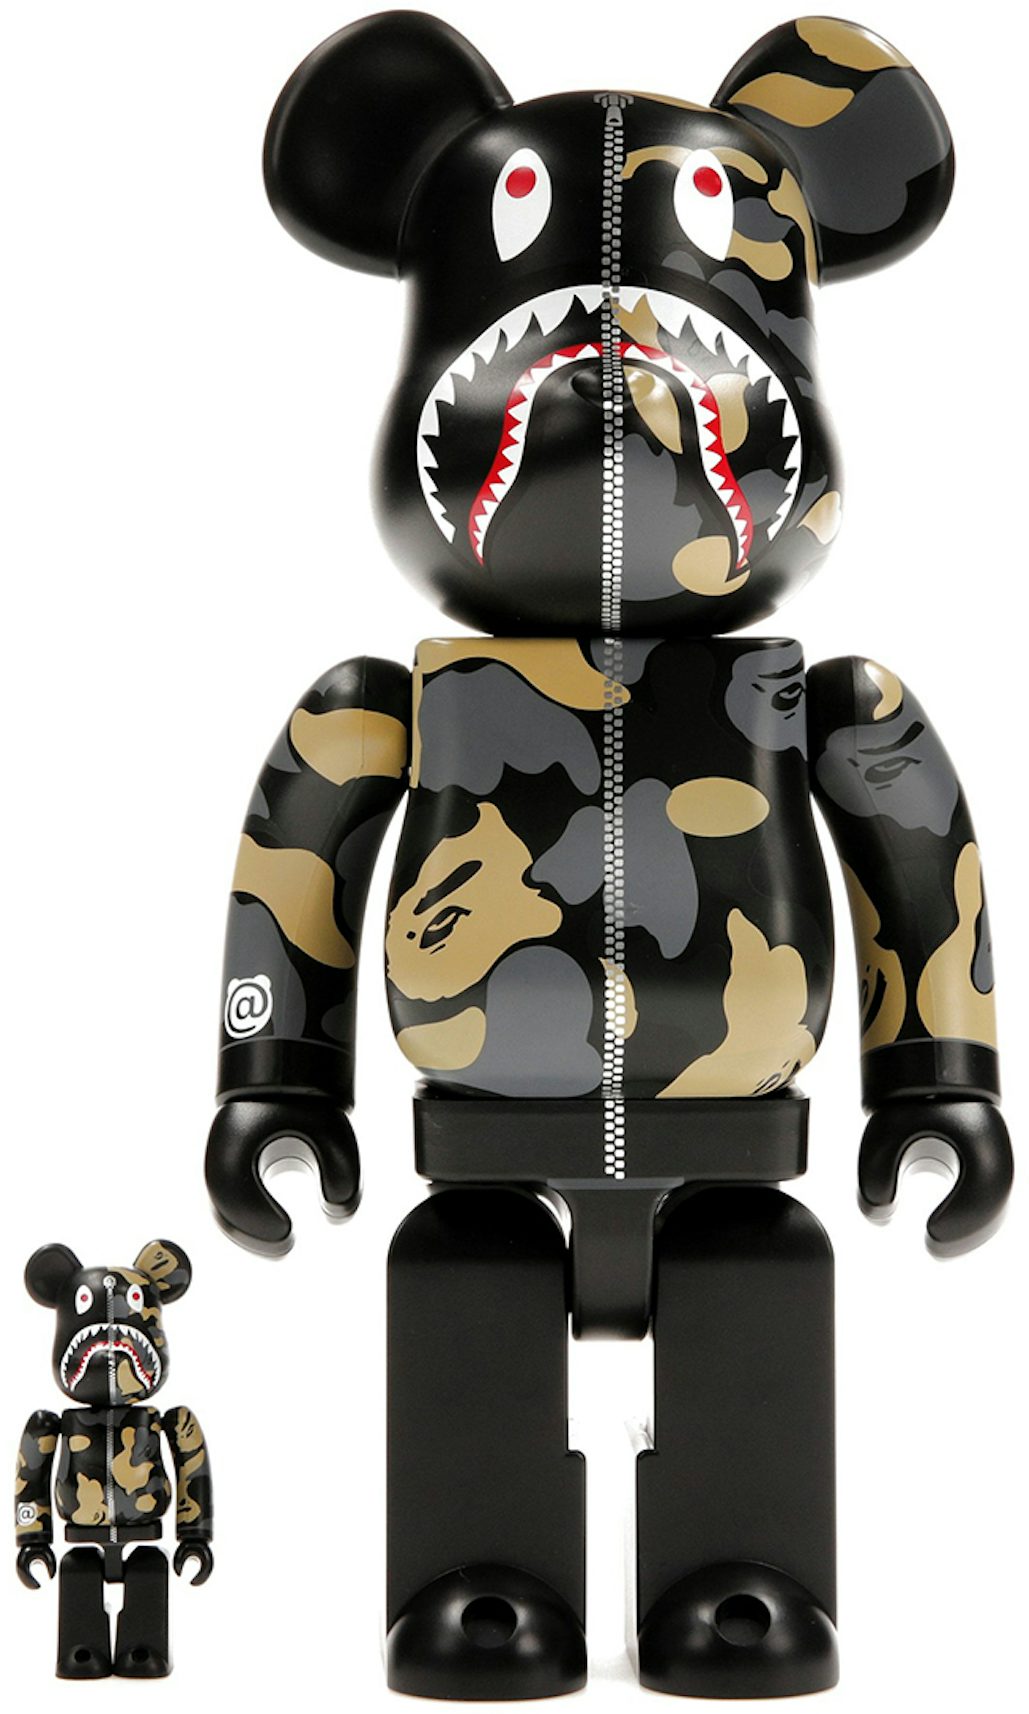 Most Expensive Bearbrick 1000% on StockX in August 2021